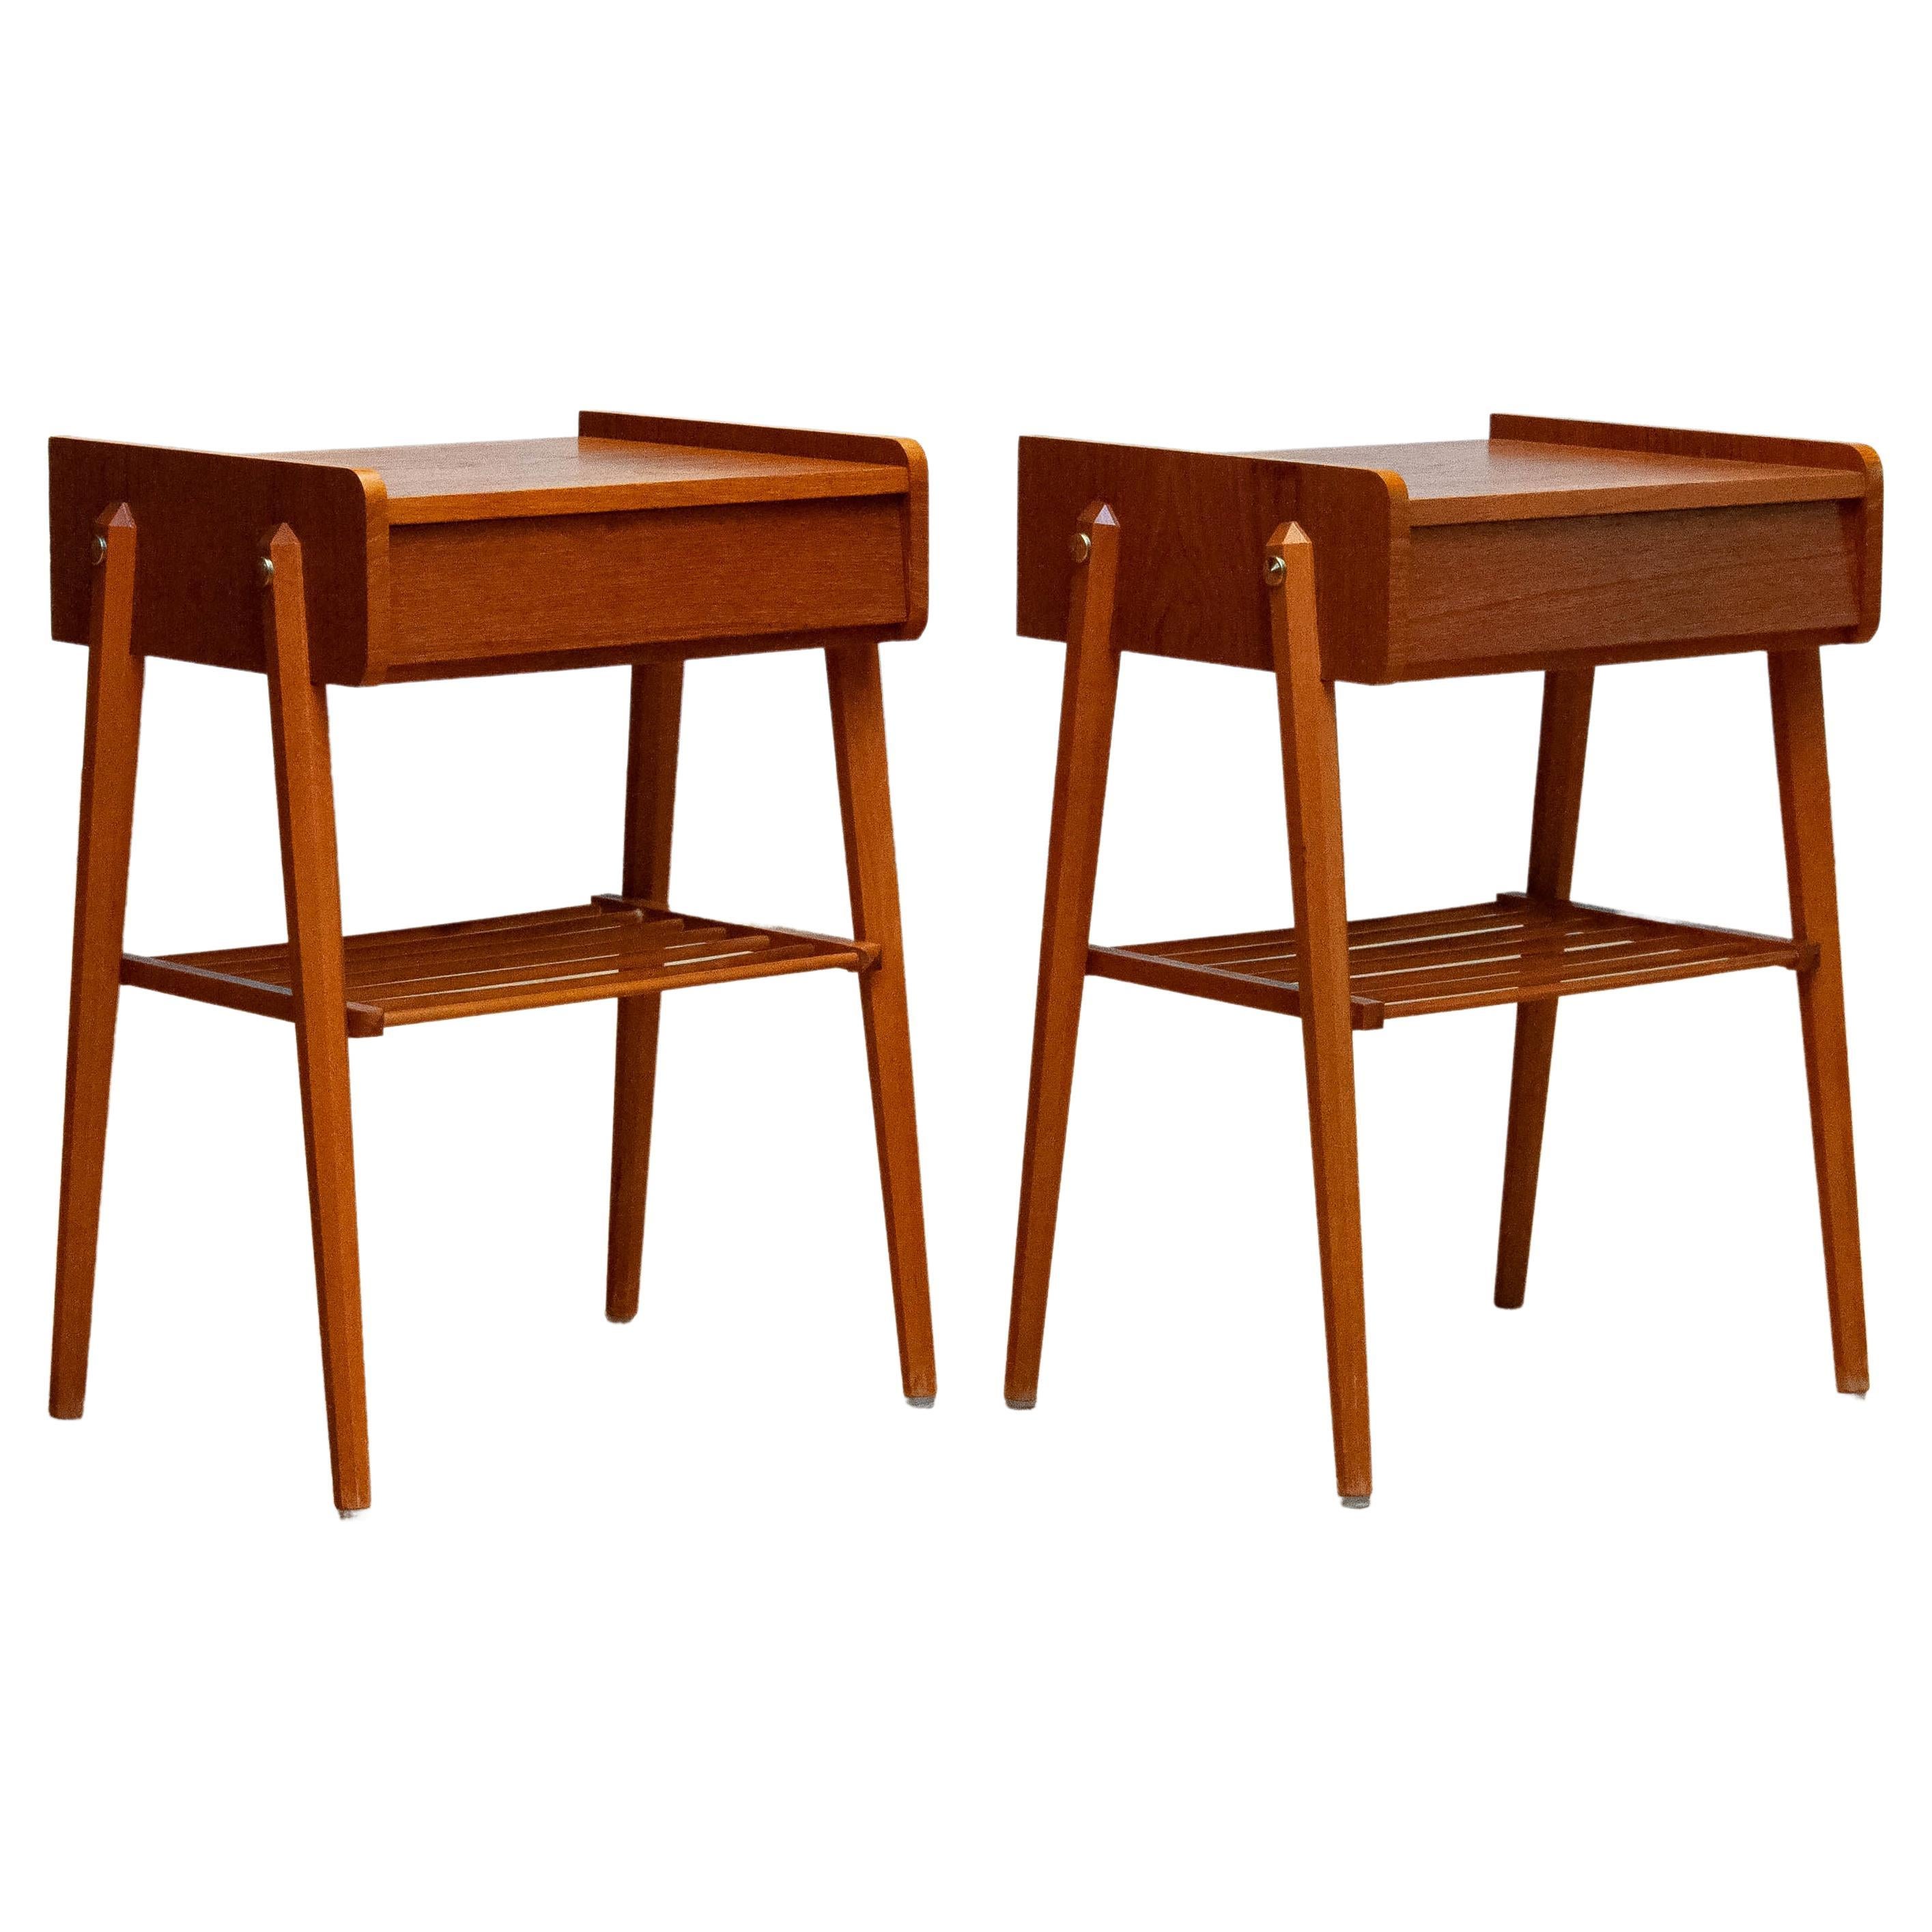 1950s Pair Swedish Night Stands / Bed side Tables By AB Bjärni Made Of Teak